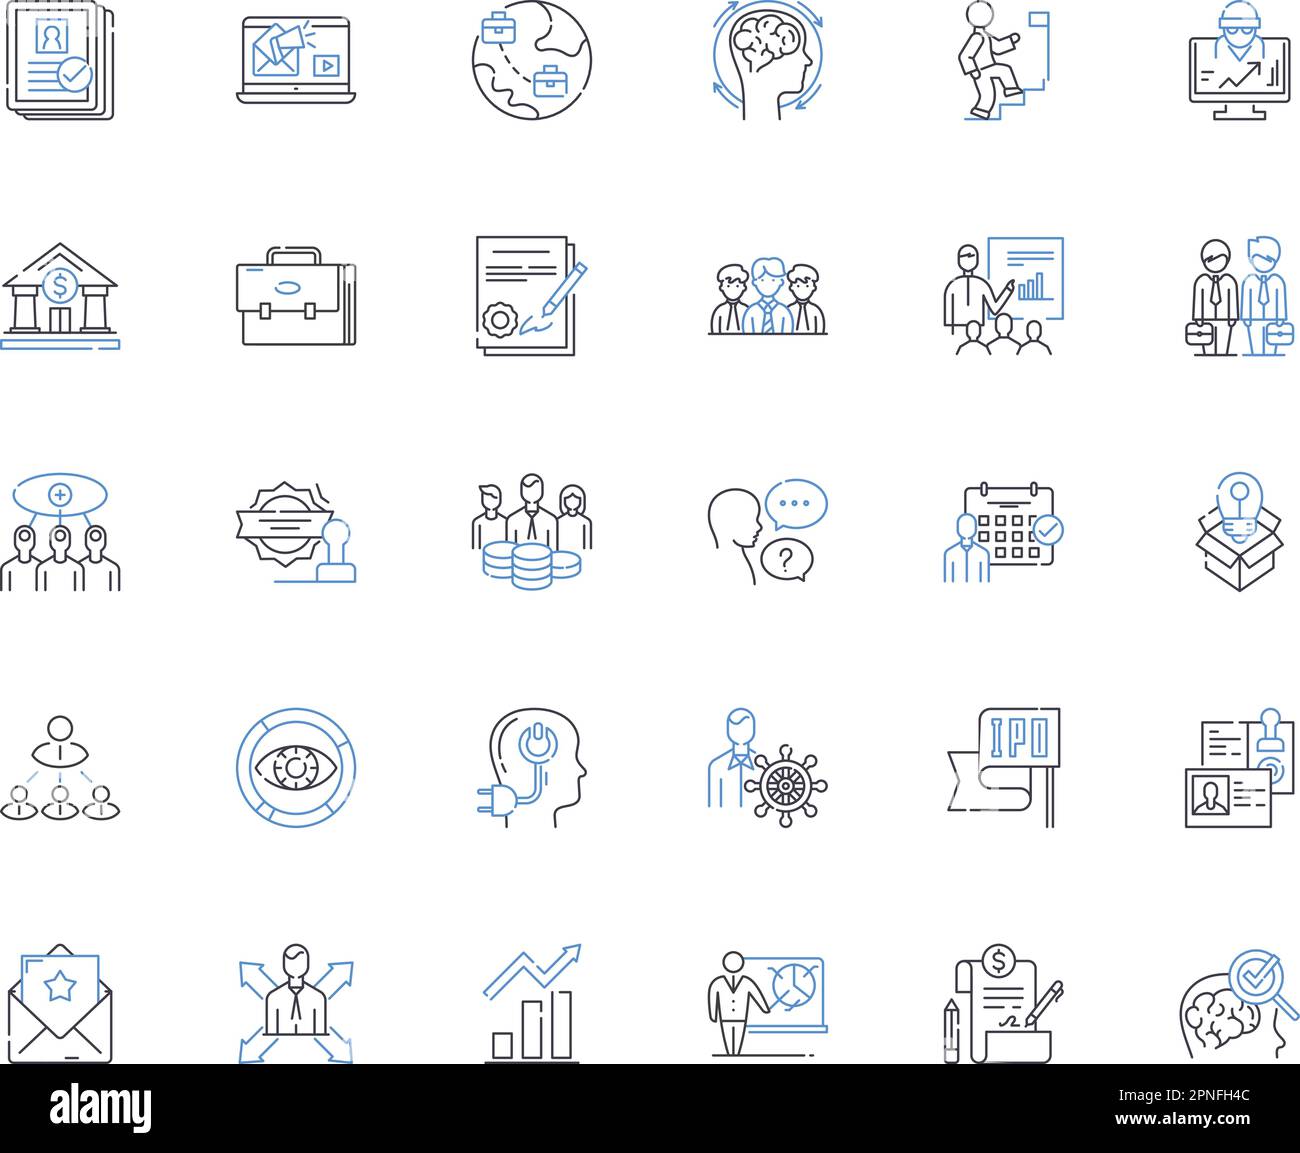 Consumer research line icons collection. Feedback, Insights, Analysis, Surveys, Demographics, Market, Behavior vector and linear illustration. Trends Stock Vector